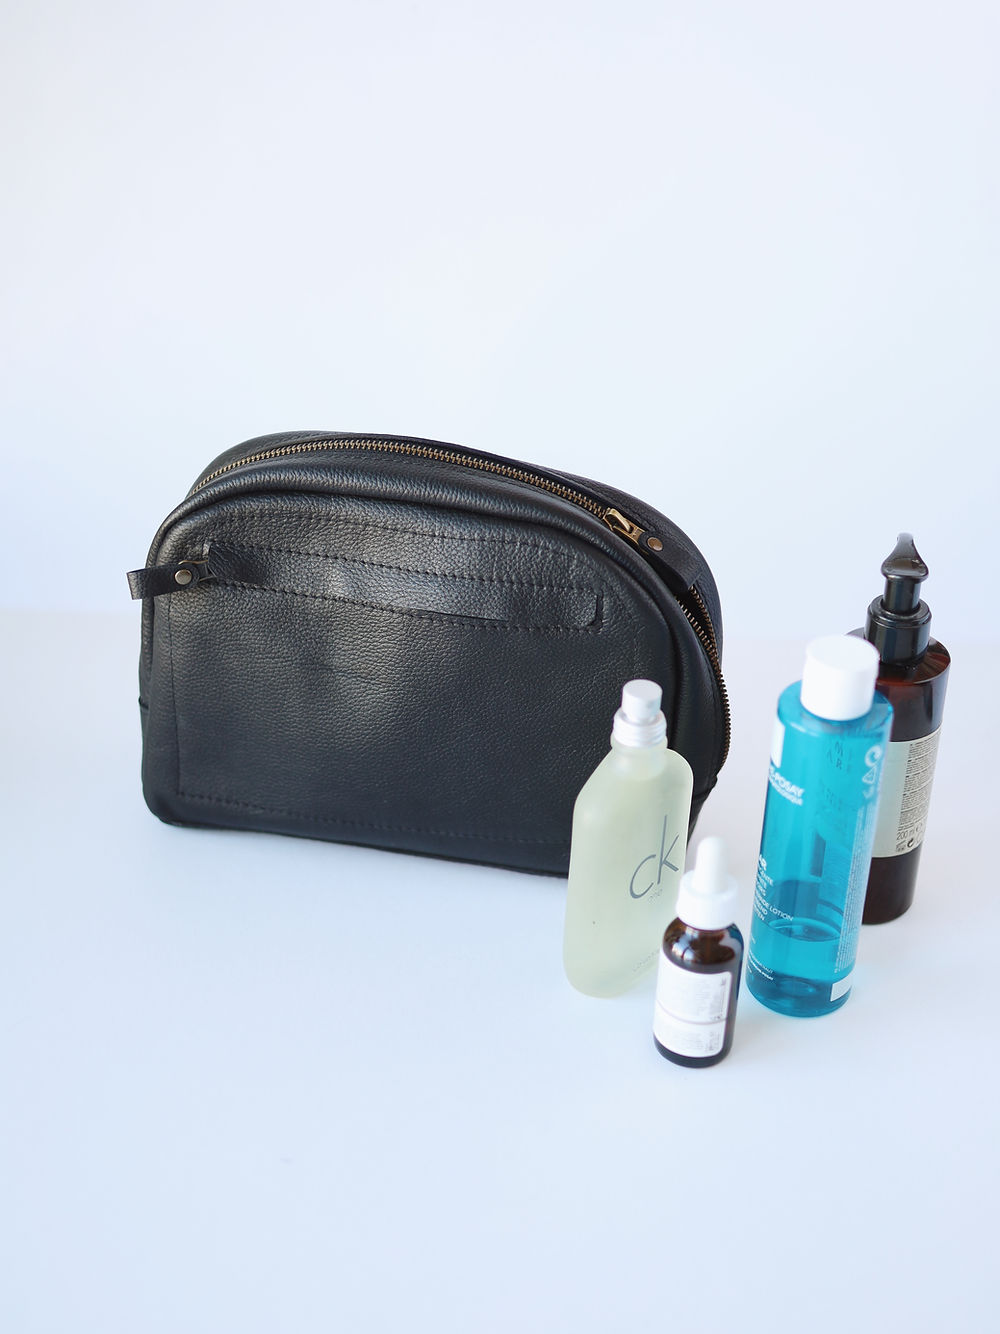 A DOUGLAS Toiletry Bag - Black with several items inside.